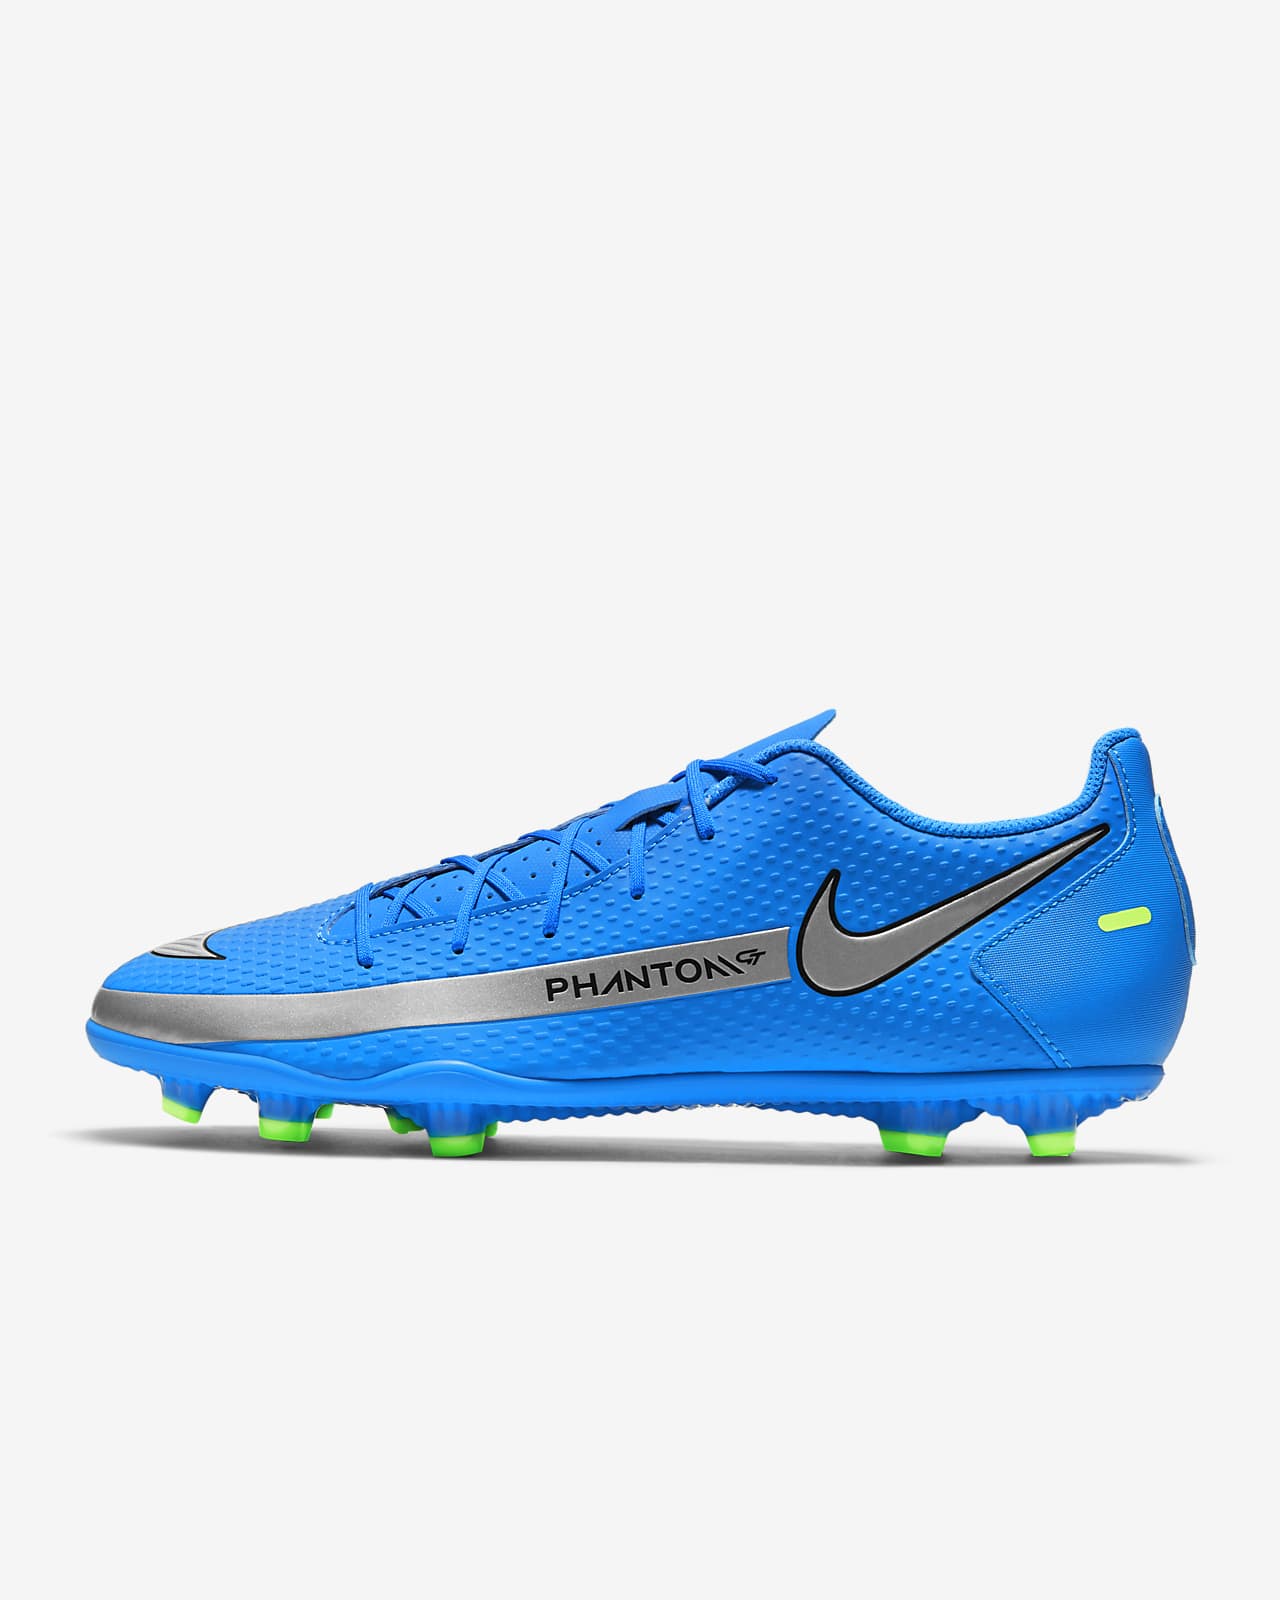 blue nike youth soccer cleats